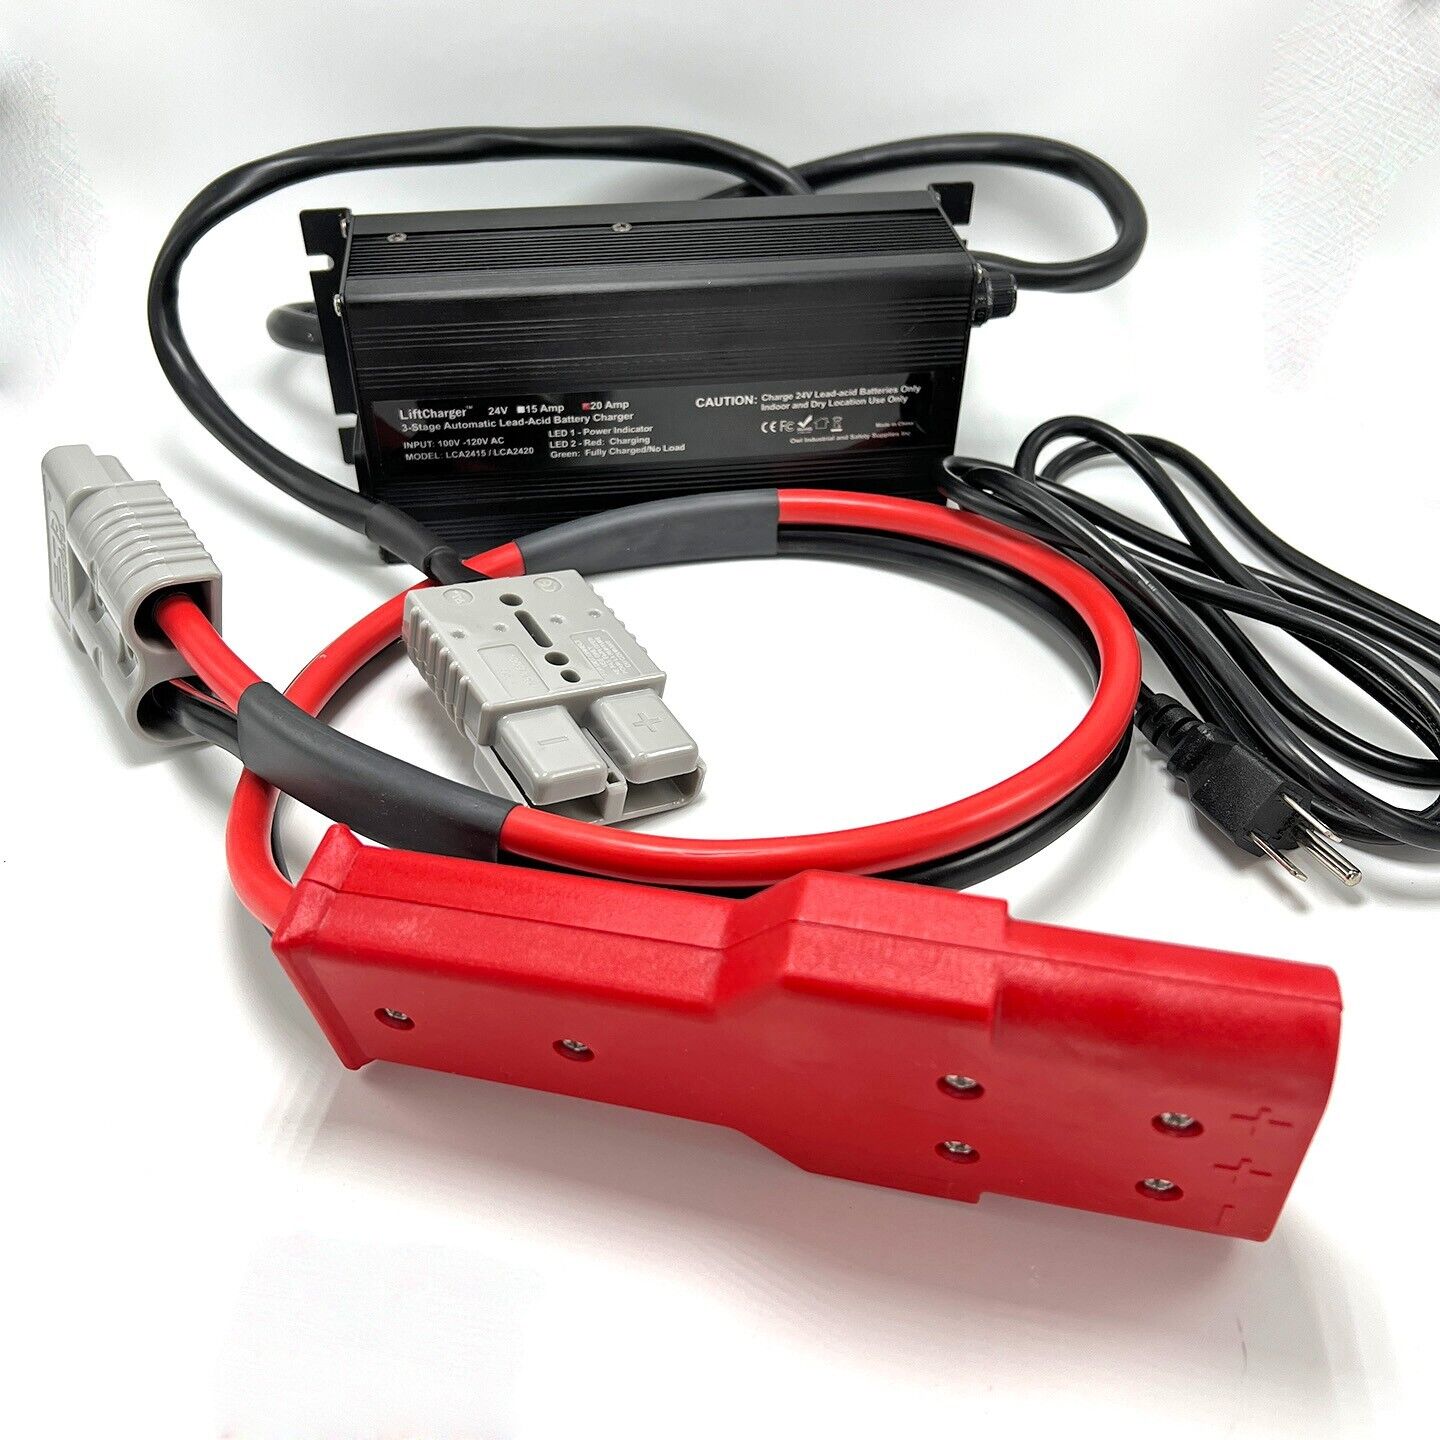 24V Ground Power Unit,Battery Charger/Tender for Aircraft with Cessna 3-Pin Plug